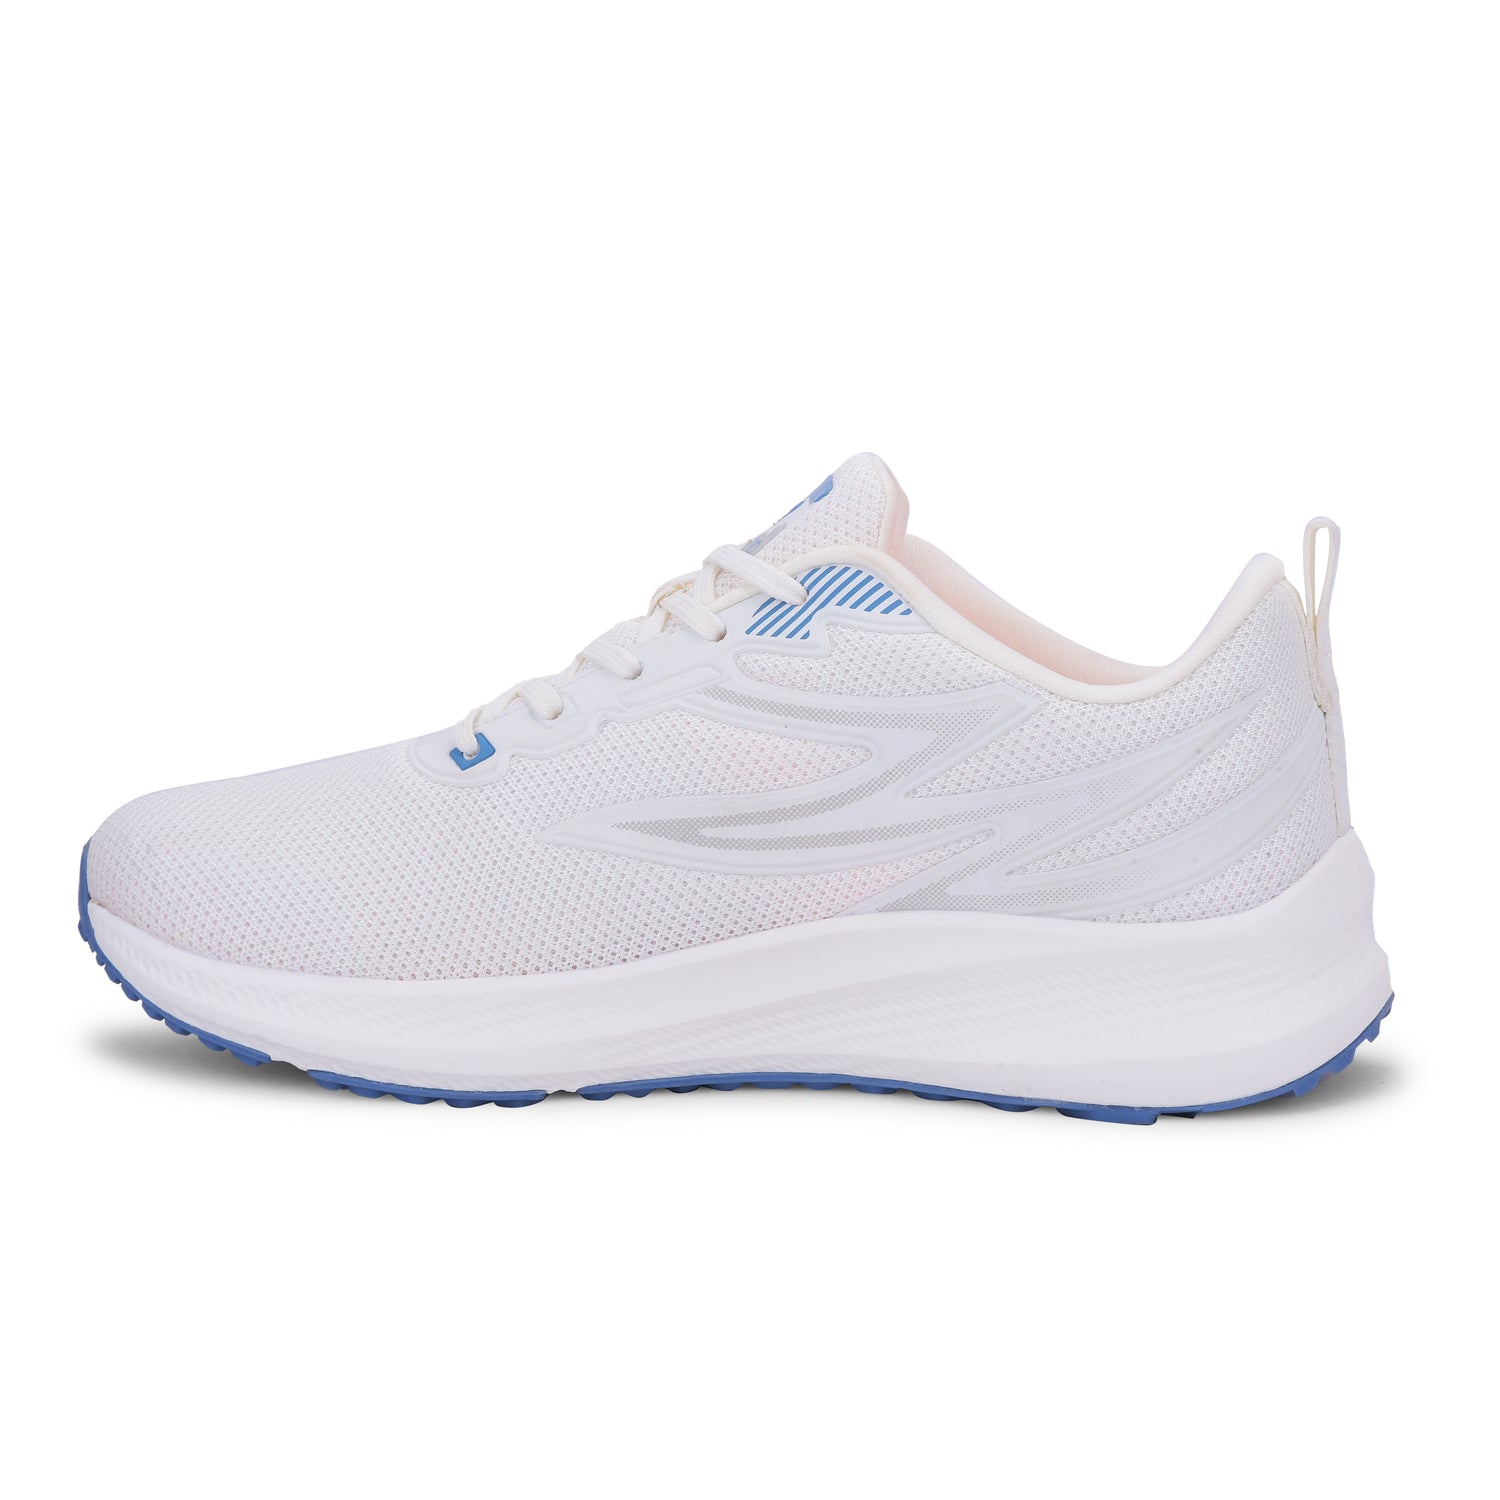 Calcetto CLT-2011 White Running Shoes For Men